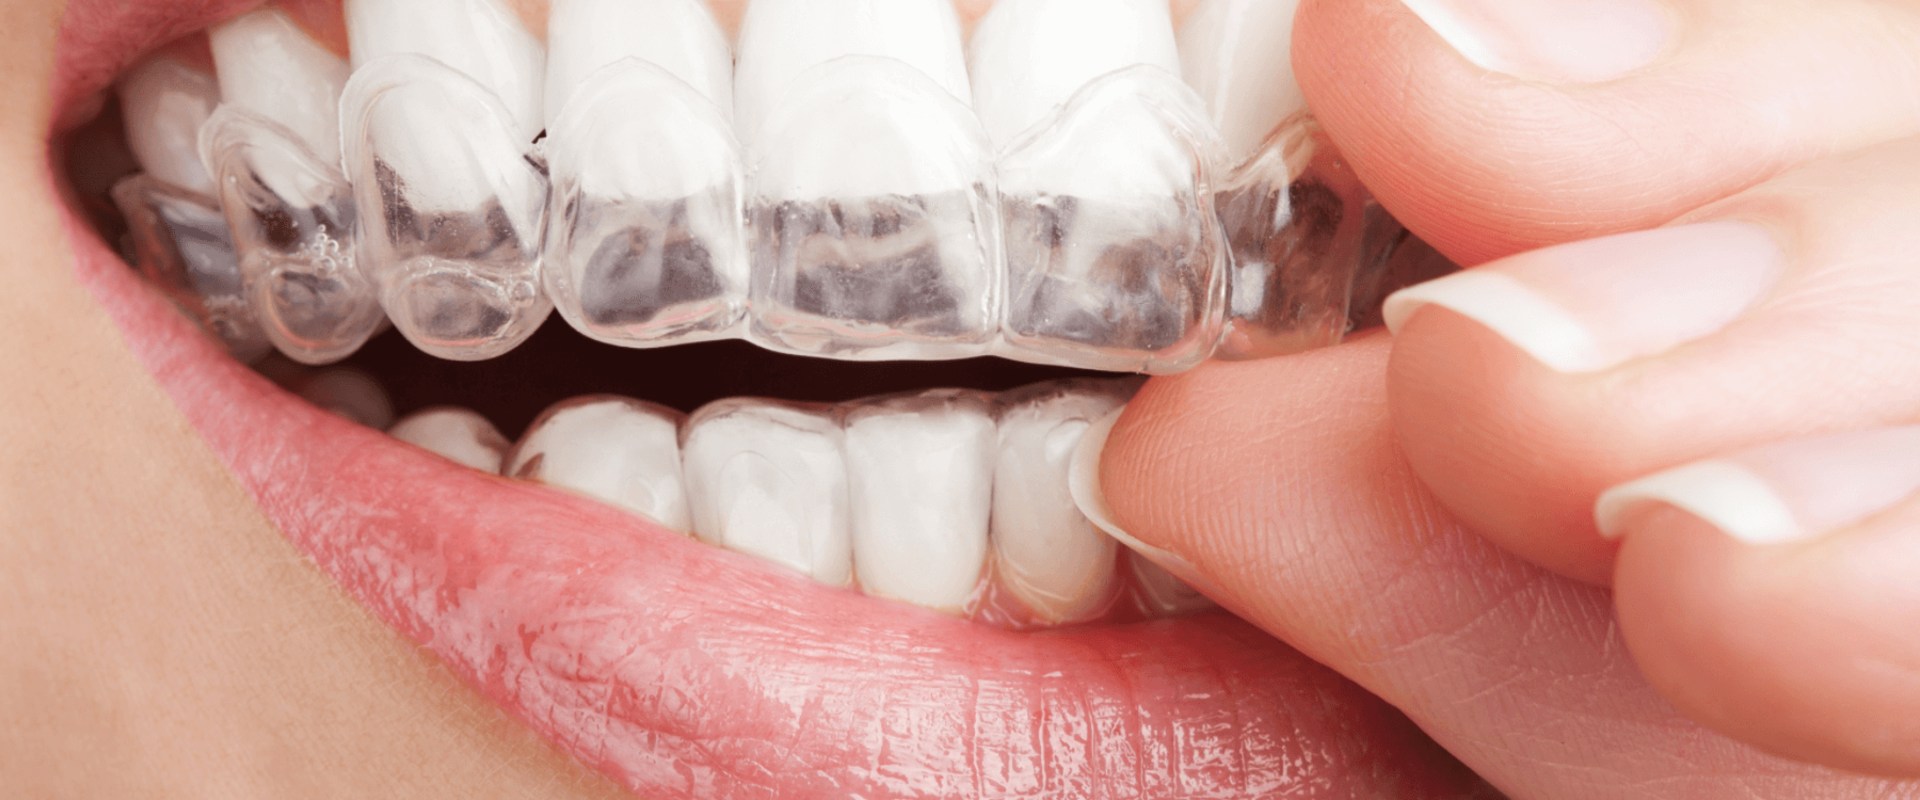 Can you choose whether you want braces or invisalign?